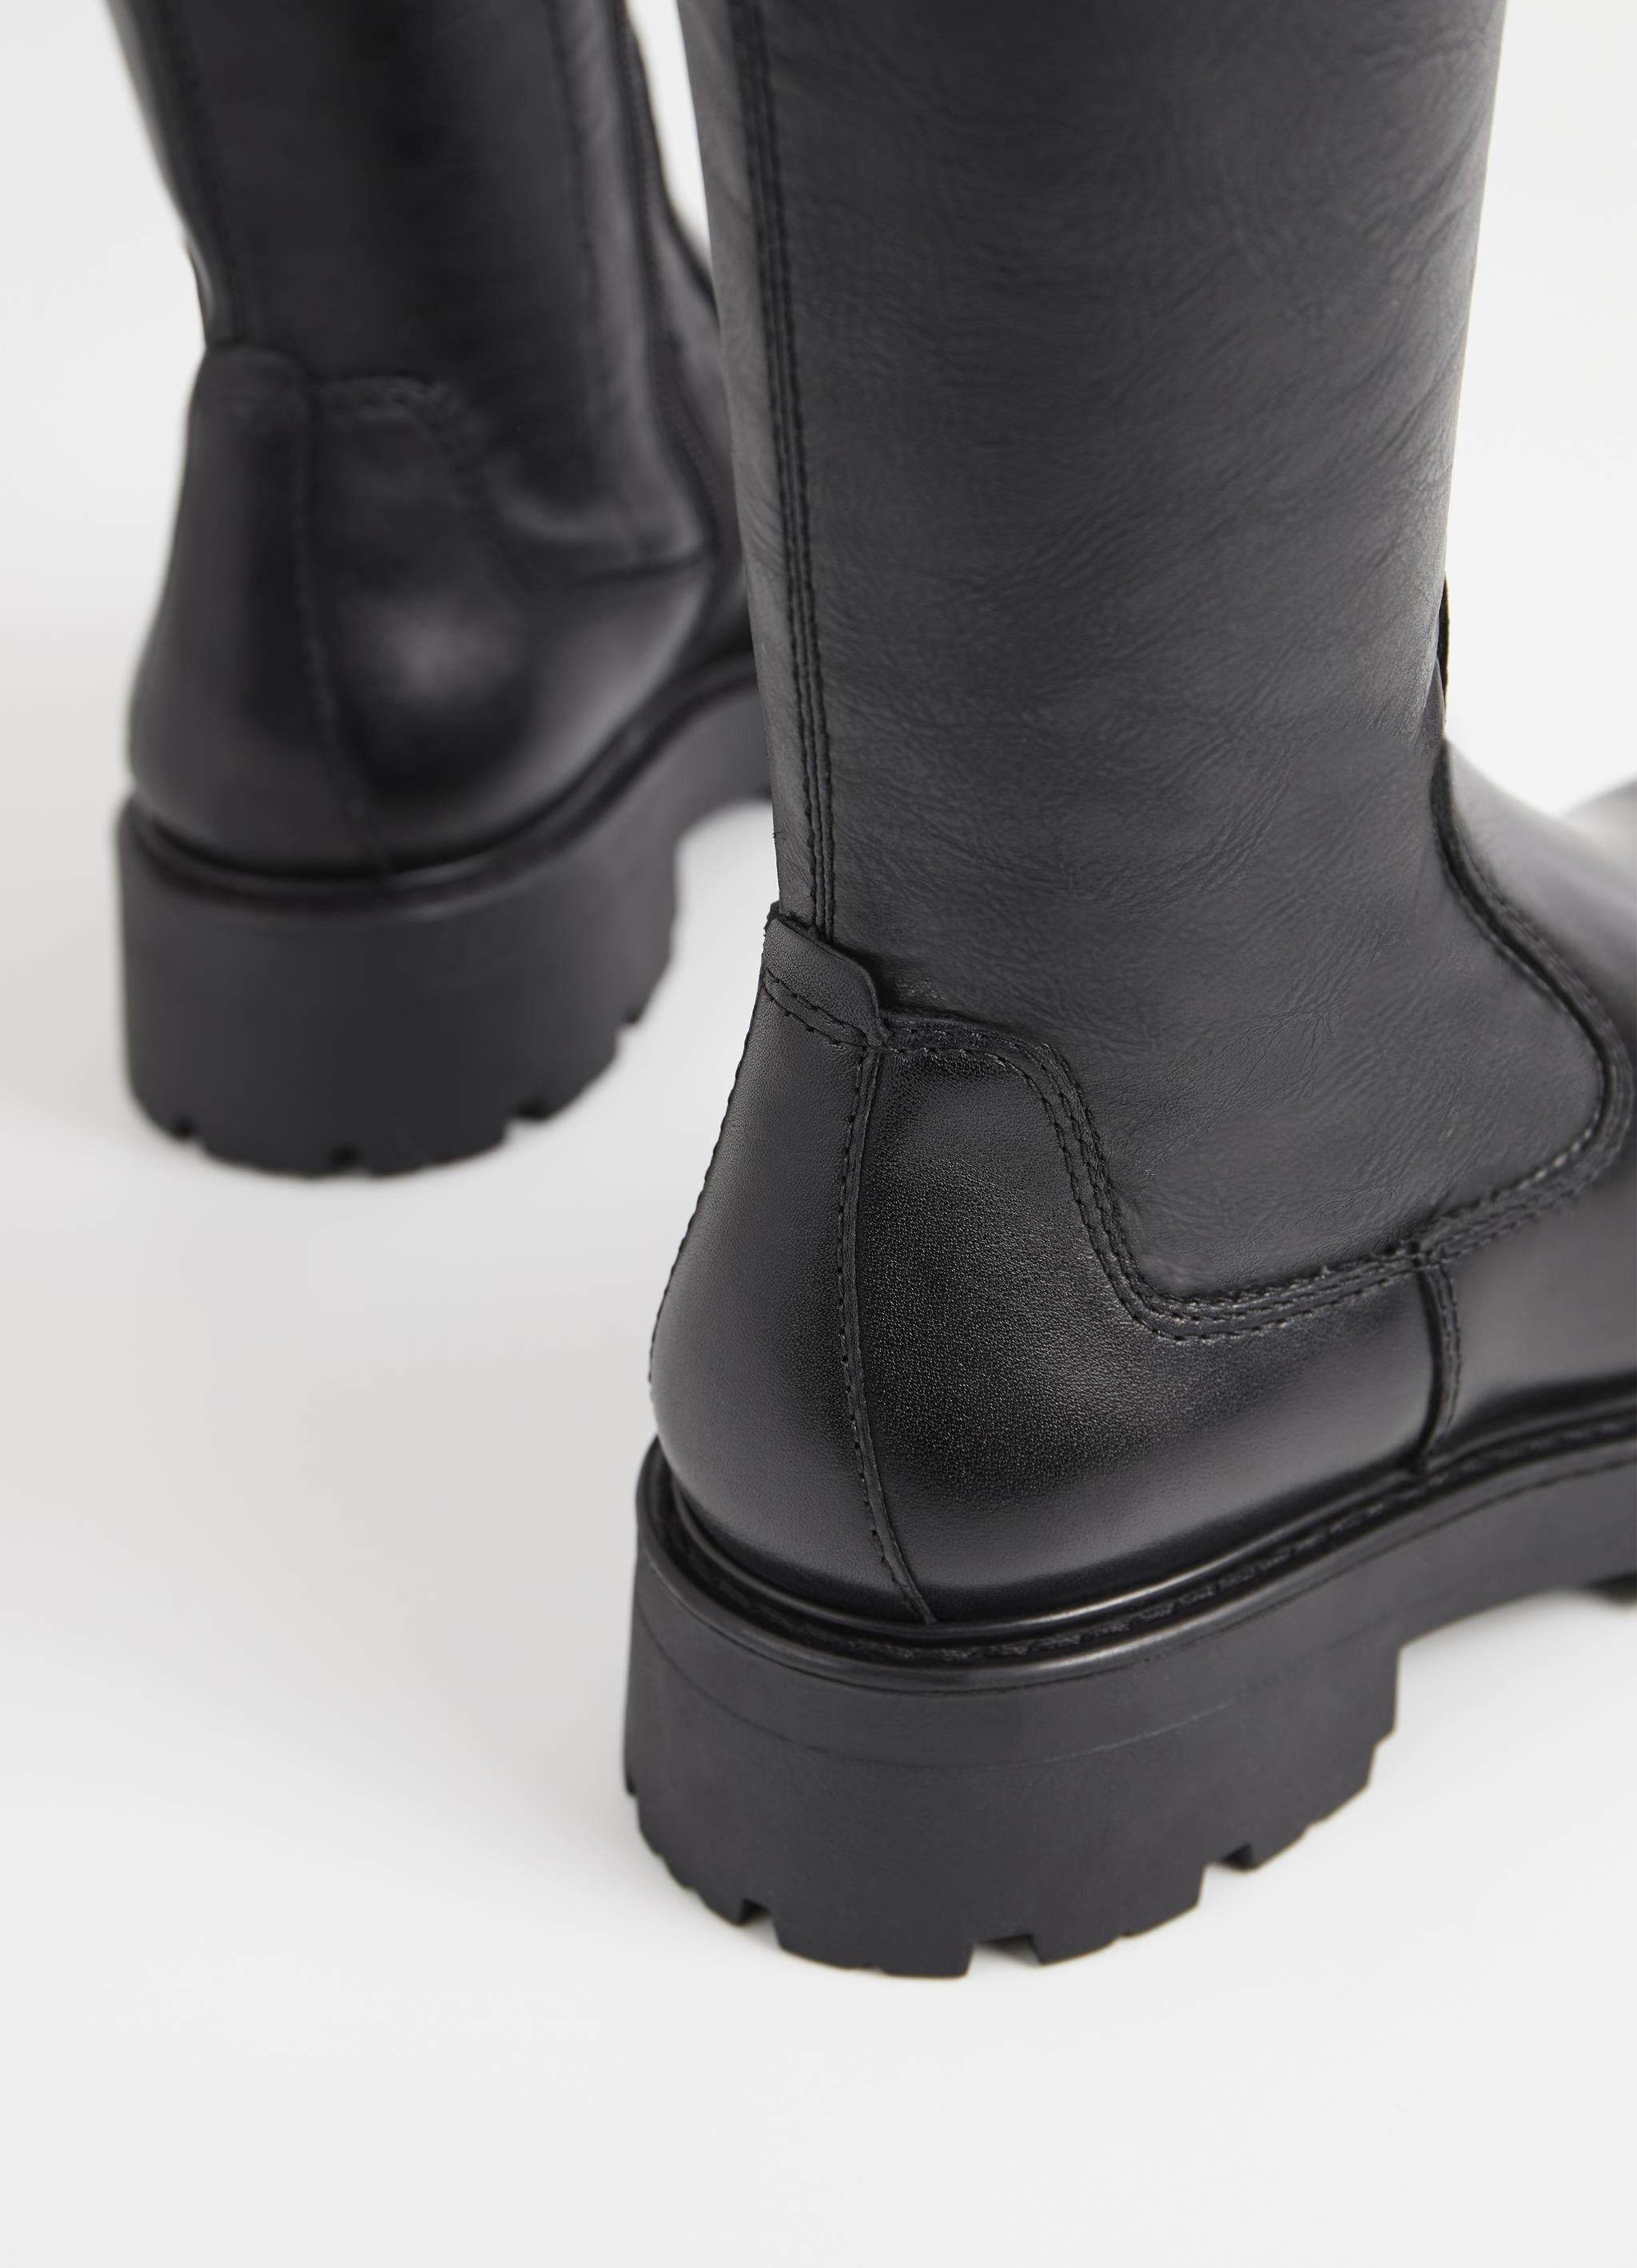 Long black leather boot with chunky sole and heel and inner zip fastening